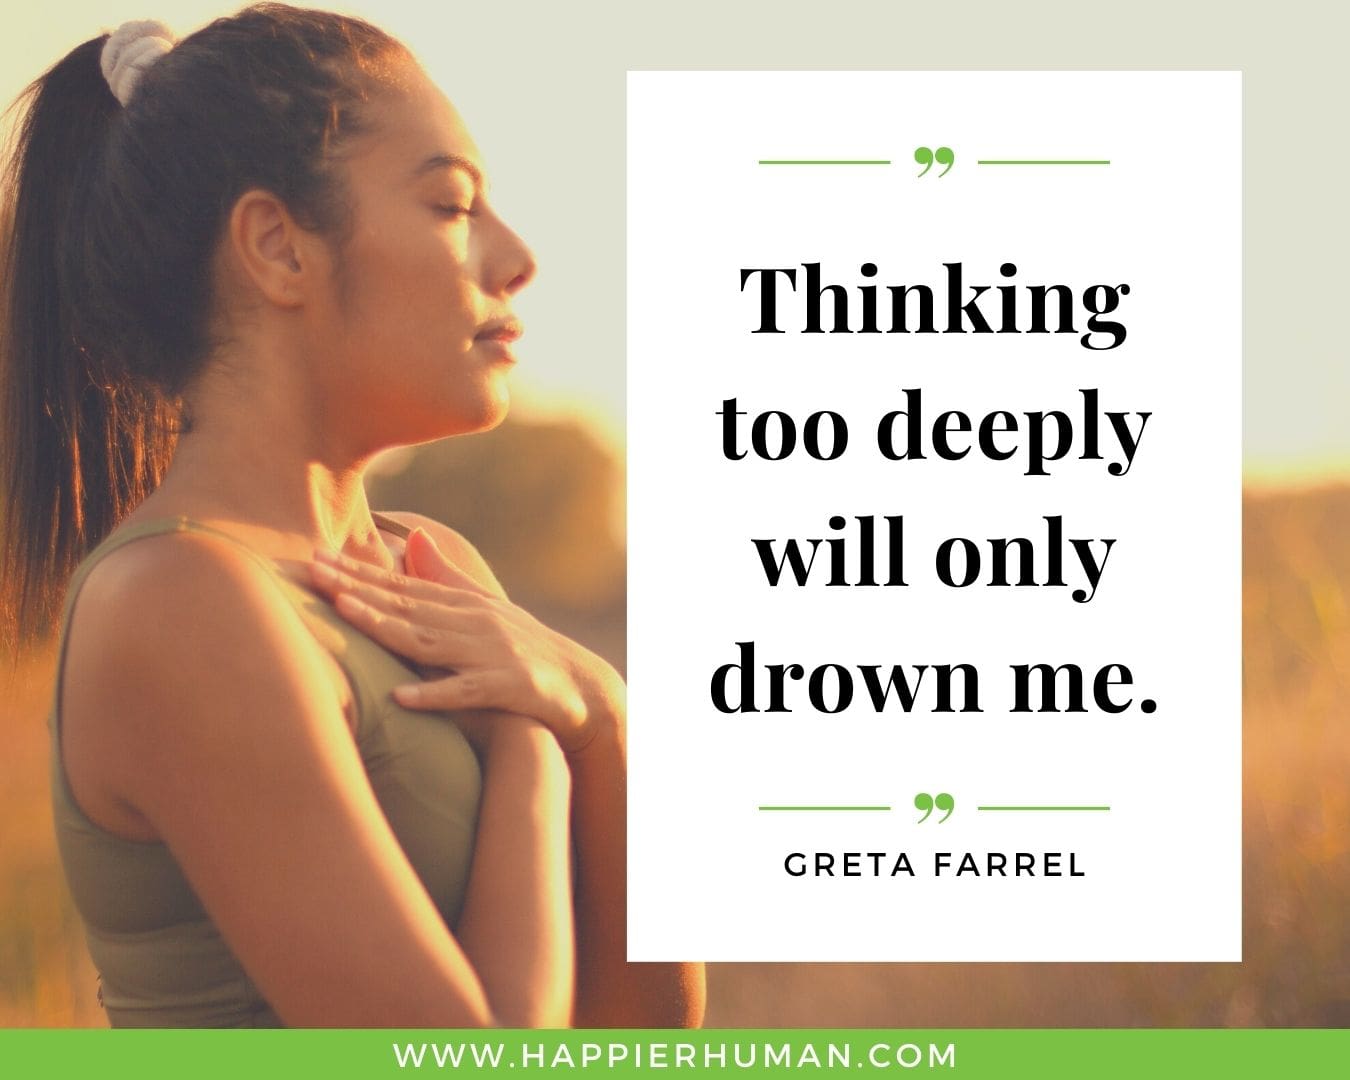 Overthinking Quotes - “Thinking too deeply will only drown me.” - Greta Farrel